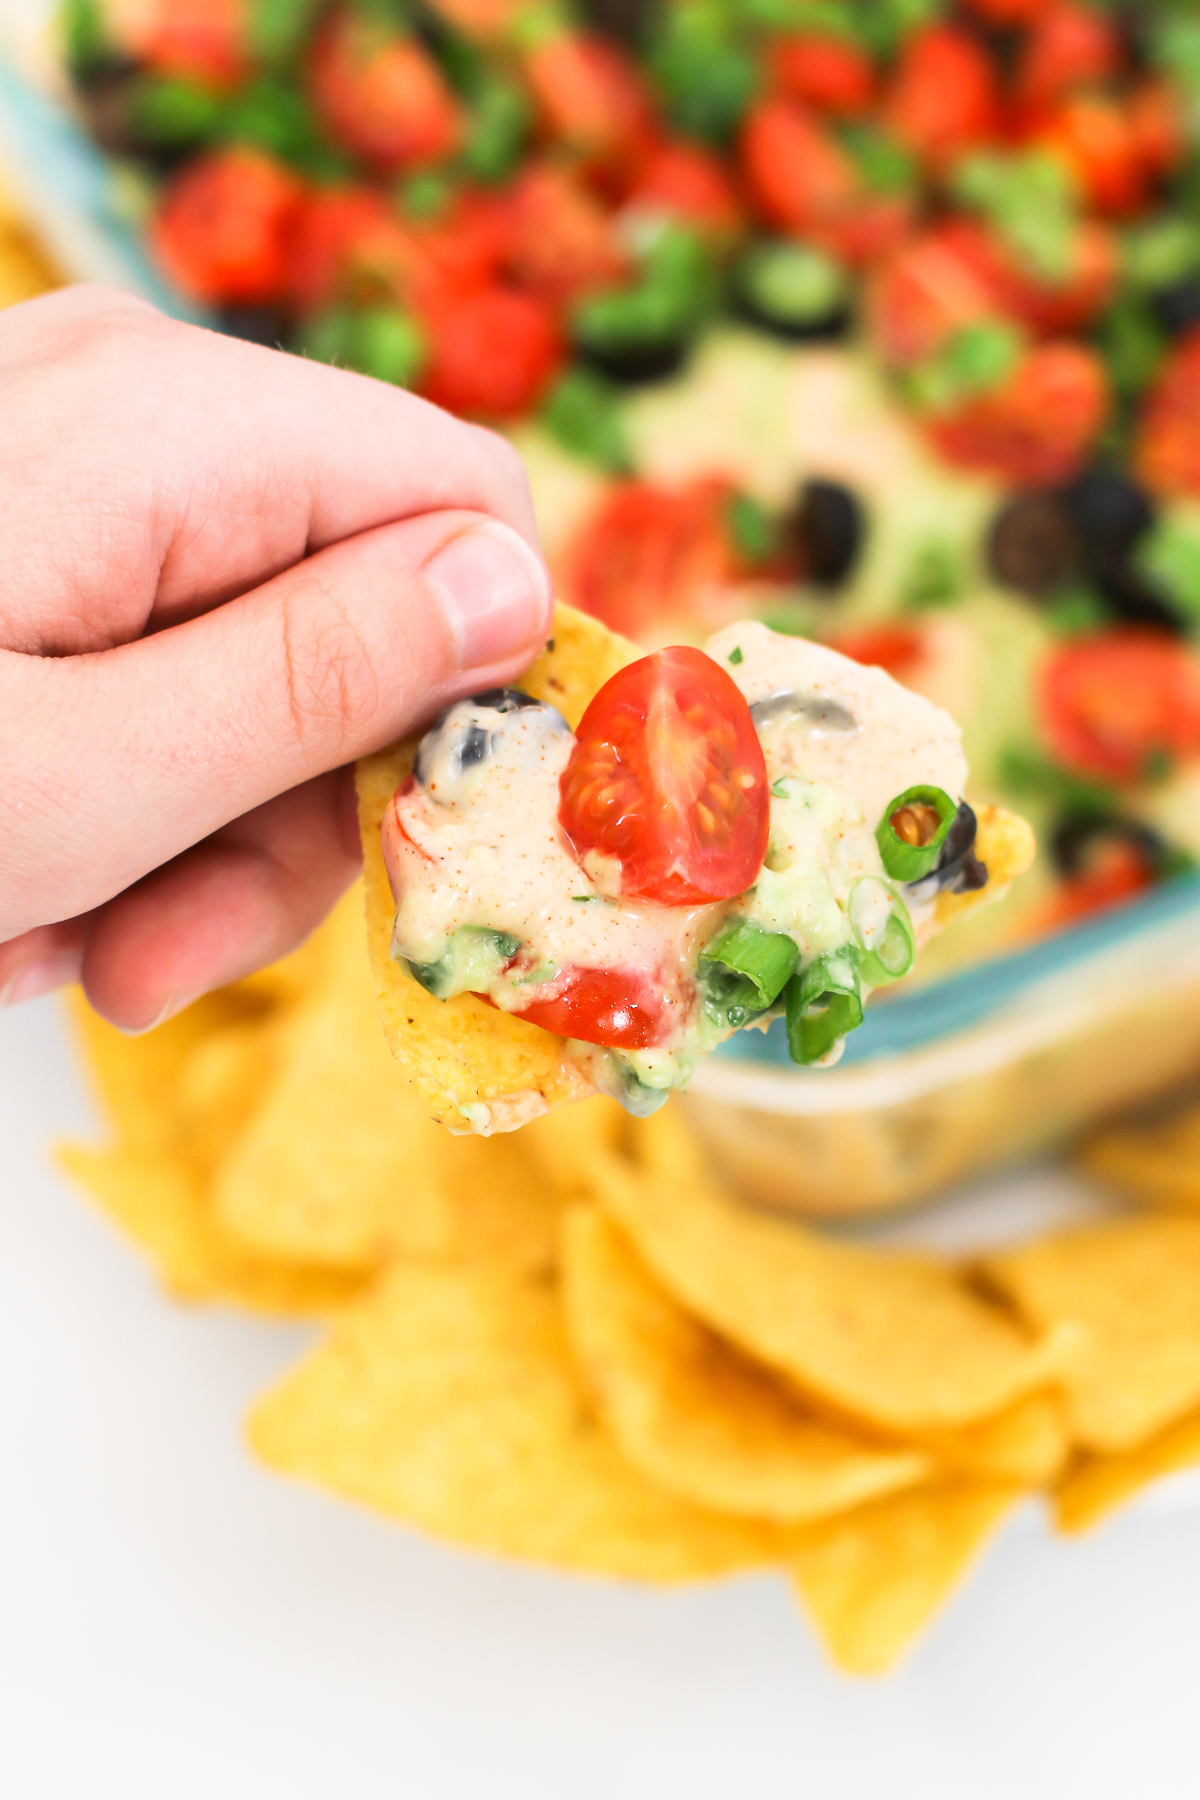 Vegan 7 Layer Bean Dip. Layers of beans, guacamole, creamy taco sauce, salsa and all of the vibrant Mexican flavors. No one will even miss the dairy! 